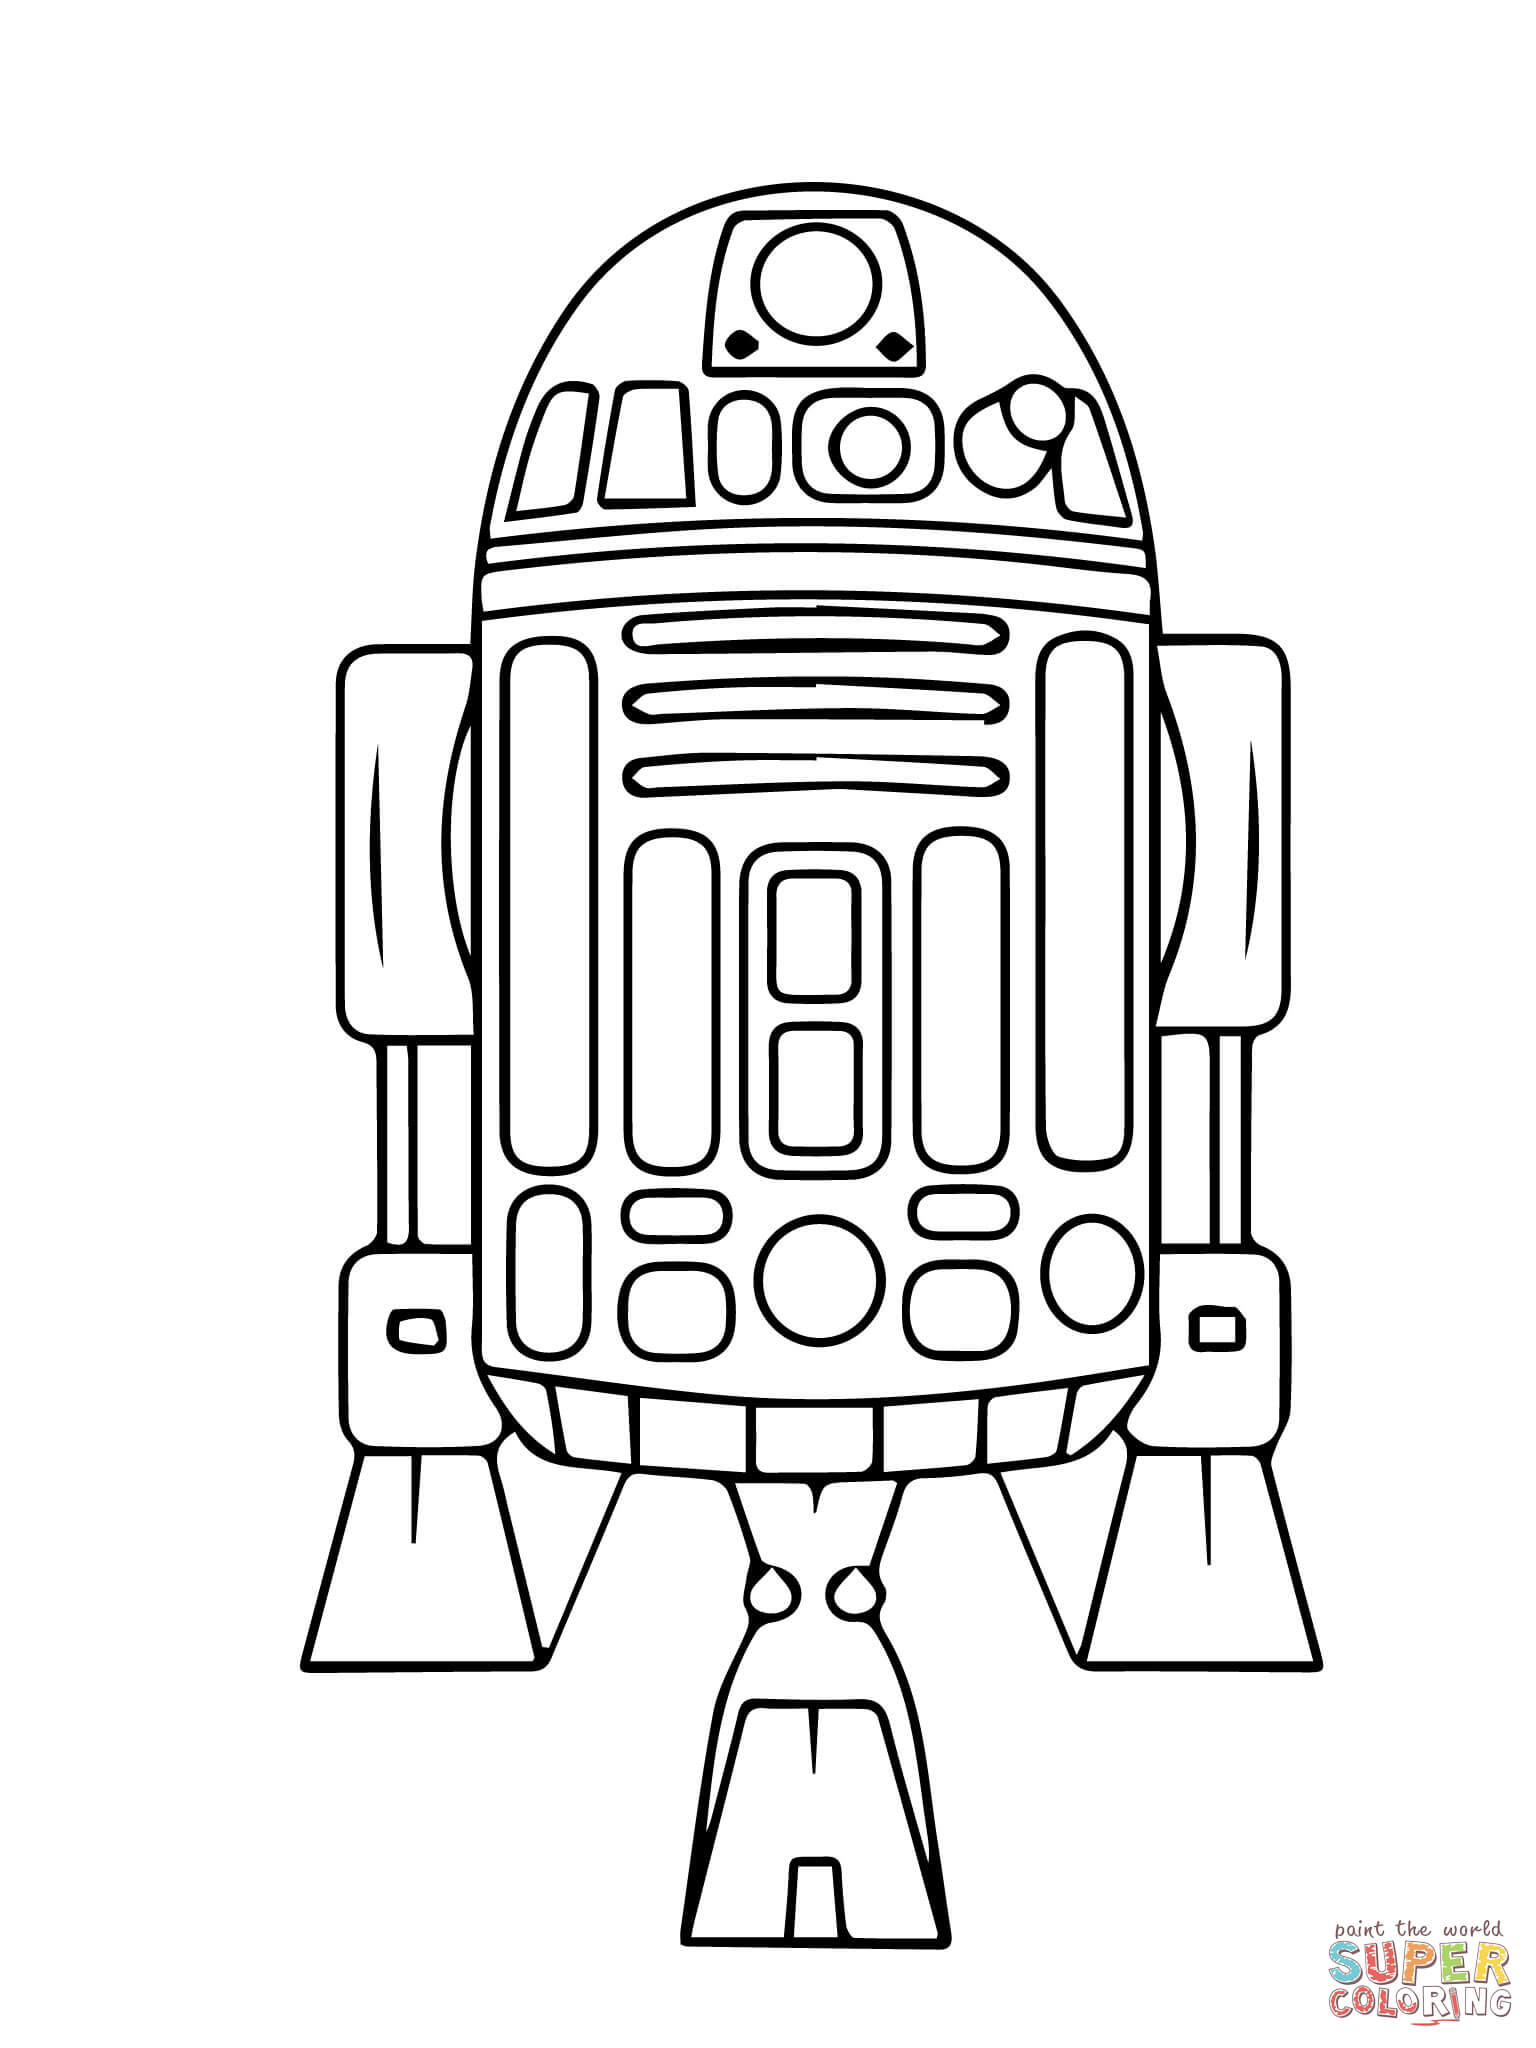 Astromech Droid R2-D2 coloring page | Free Printable Coloring Pages